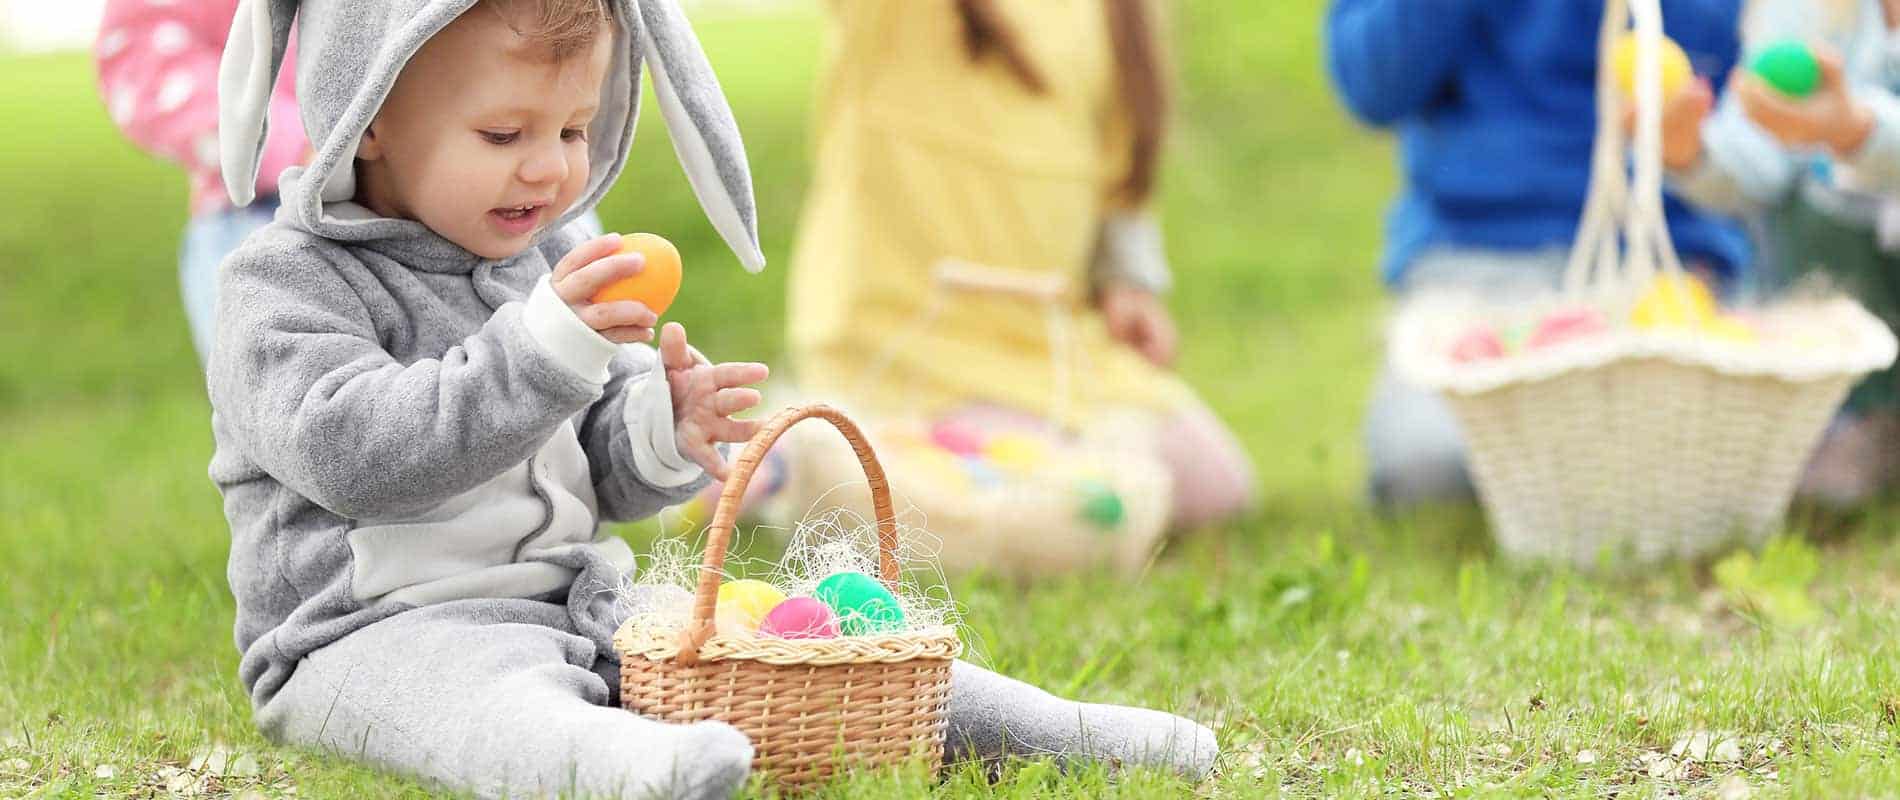 VeriFacts volunteered with the easter egg hunt